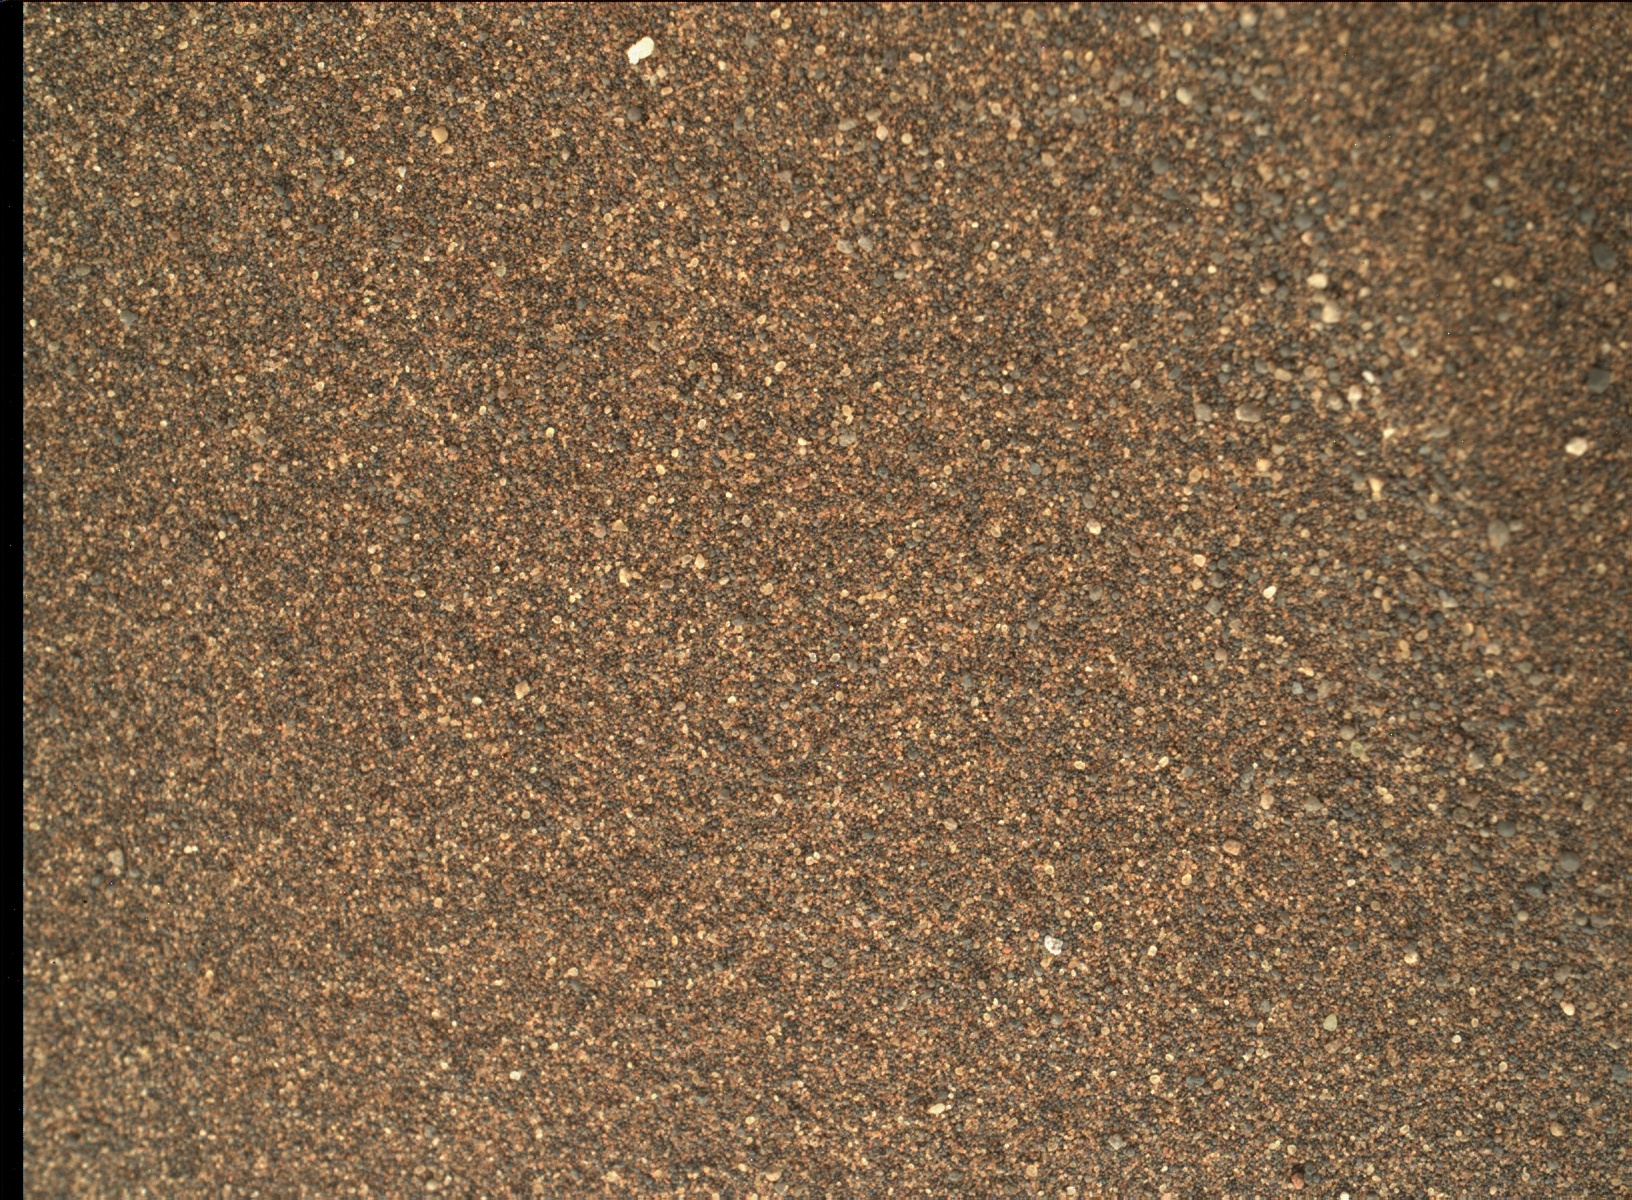 Nasa's Mars rover Curiosity acquired this image using its Mars Hand Lens Imager (MAHLI) on Sol 1602